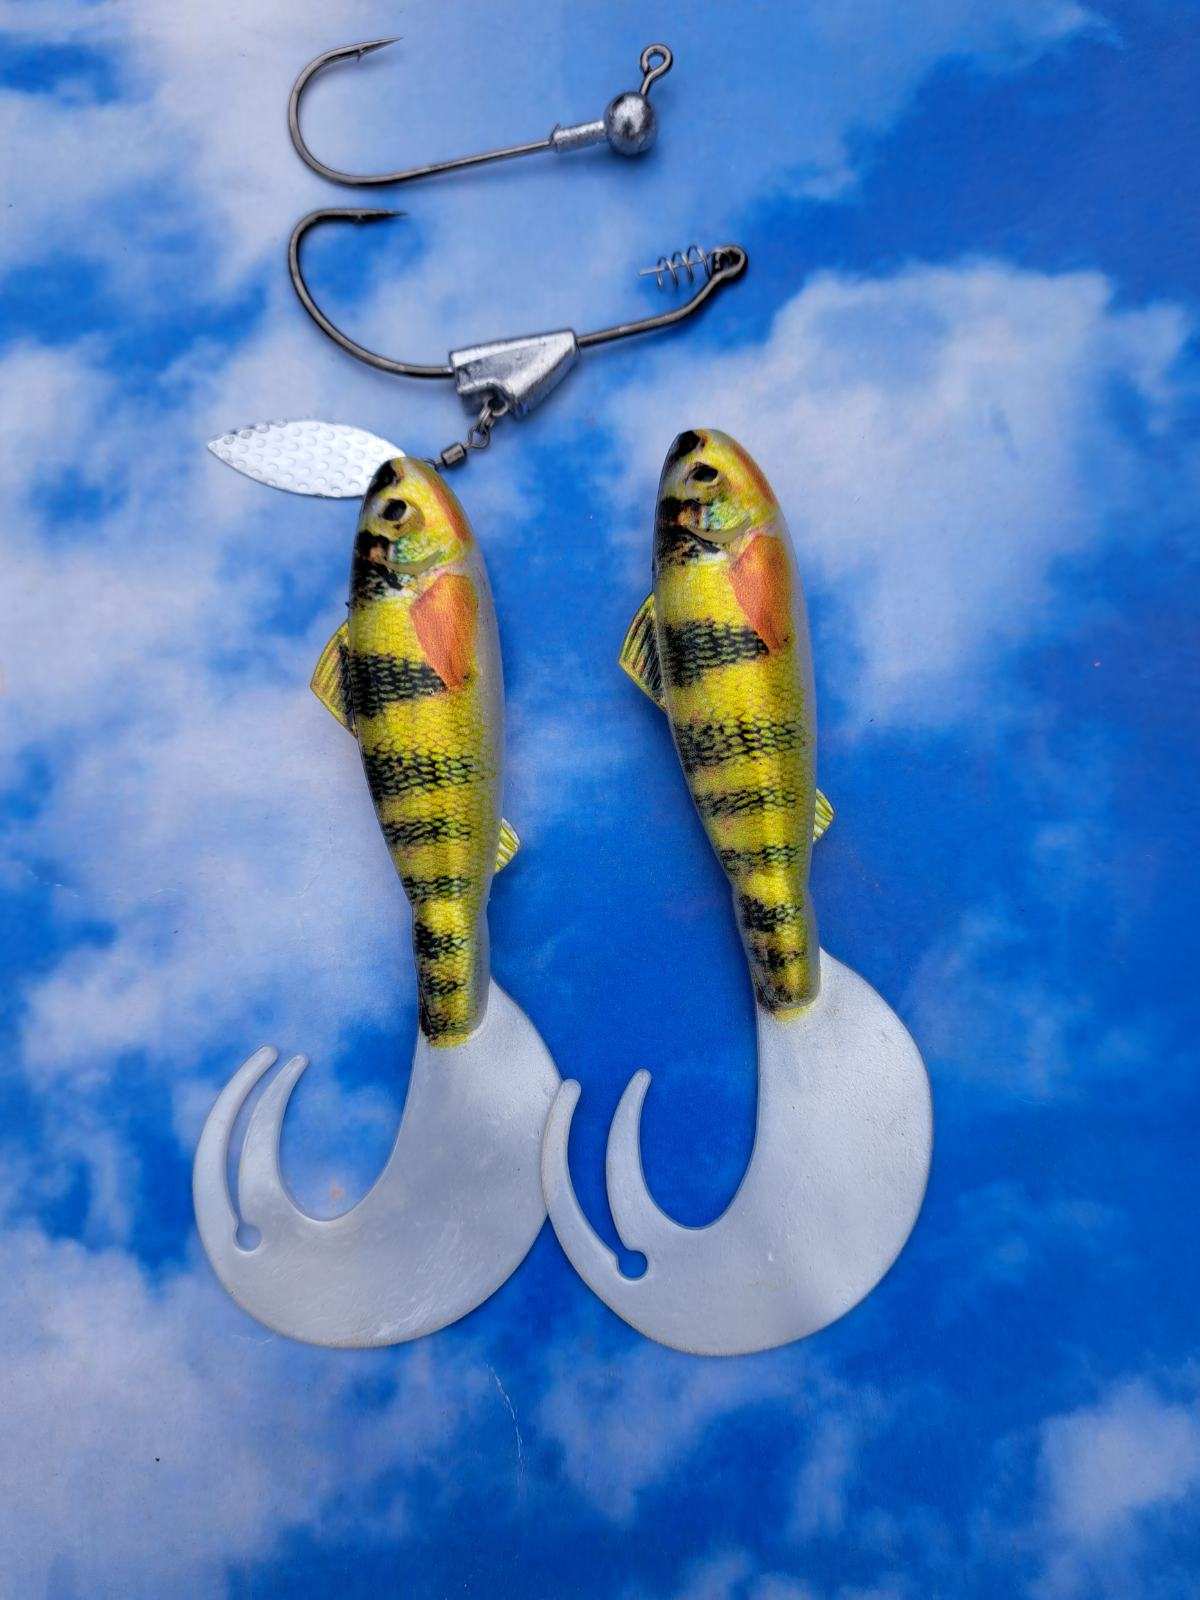 fish lure making kits - Buy fish lure making kits with free